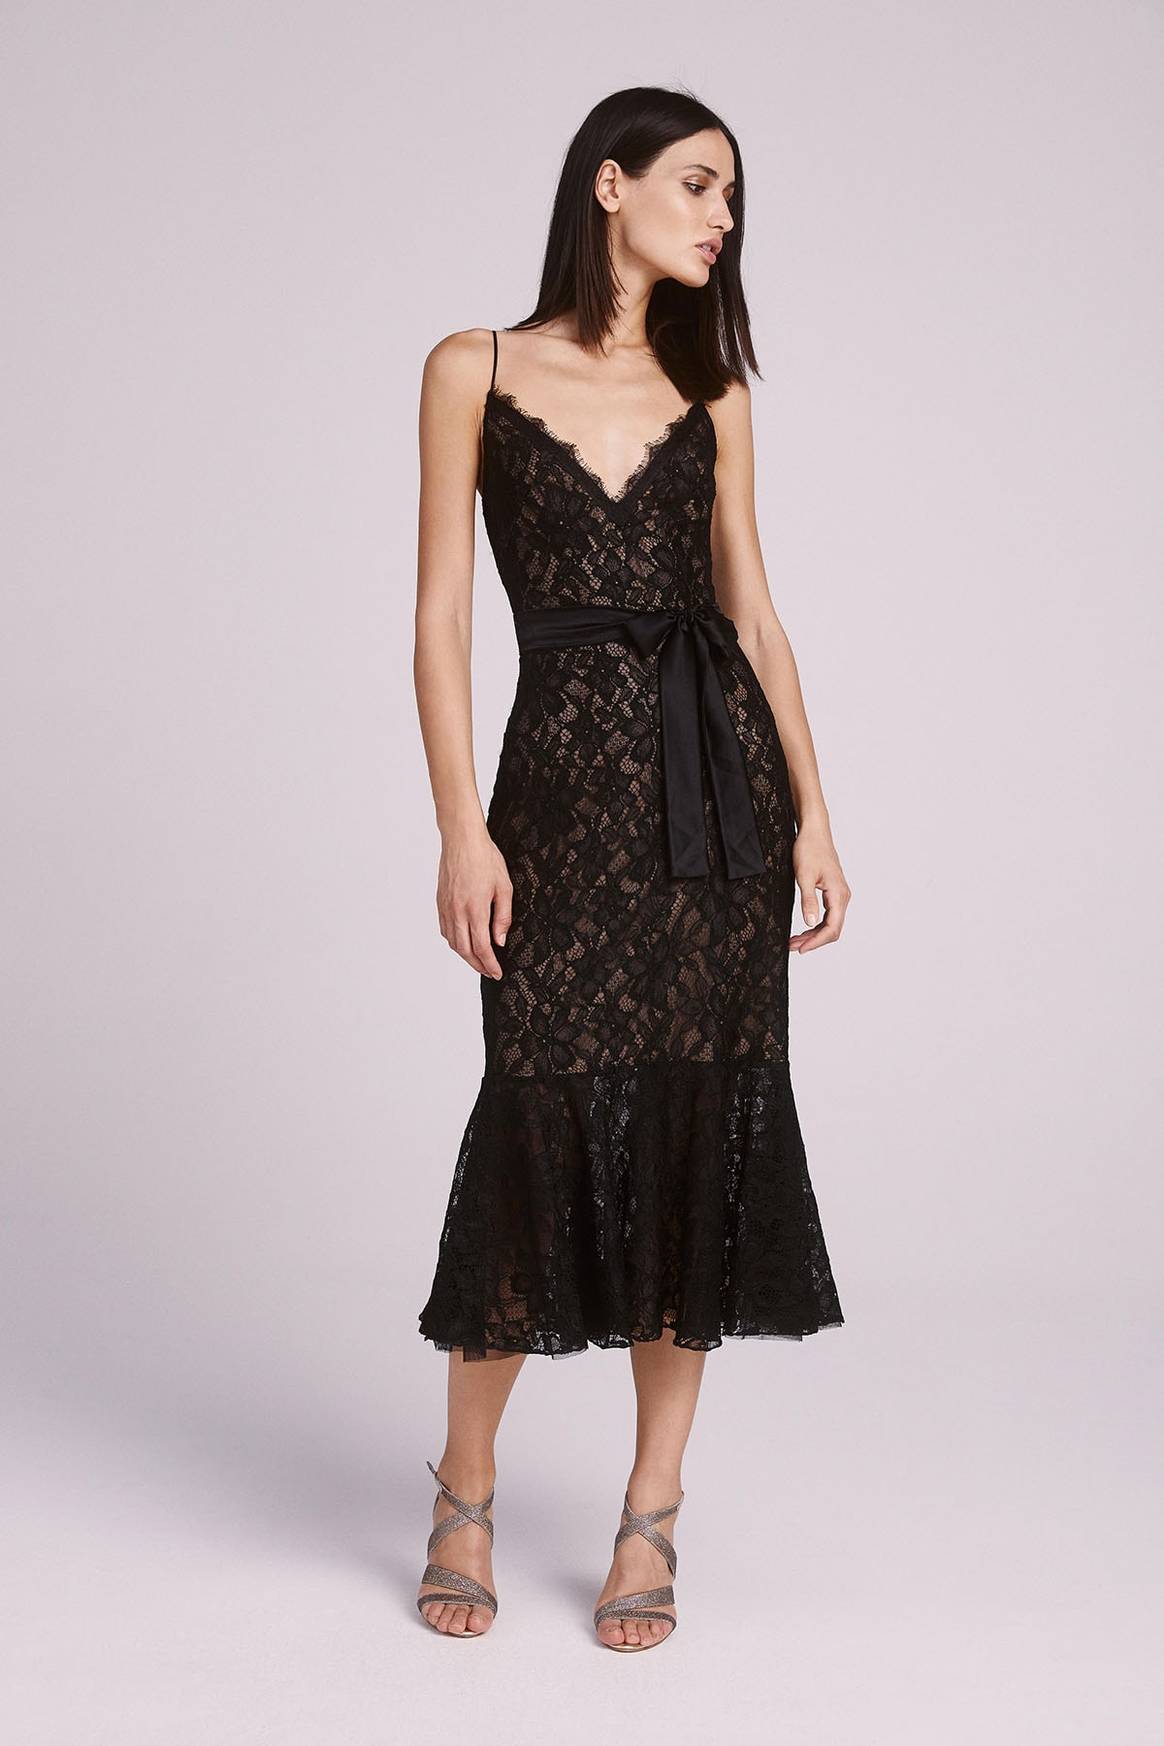 Tadashi Shoji launches more affordable brand for the younger demographic